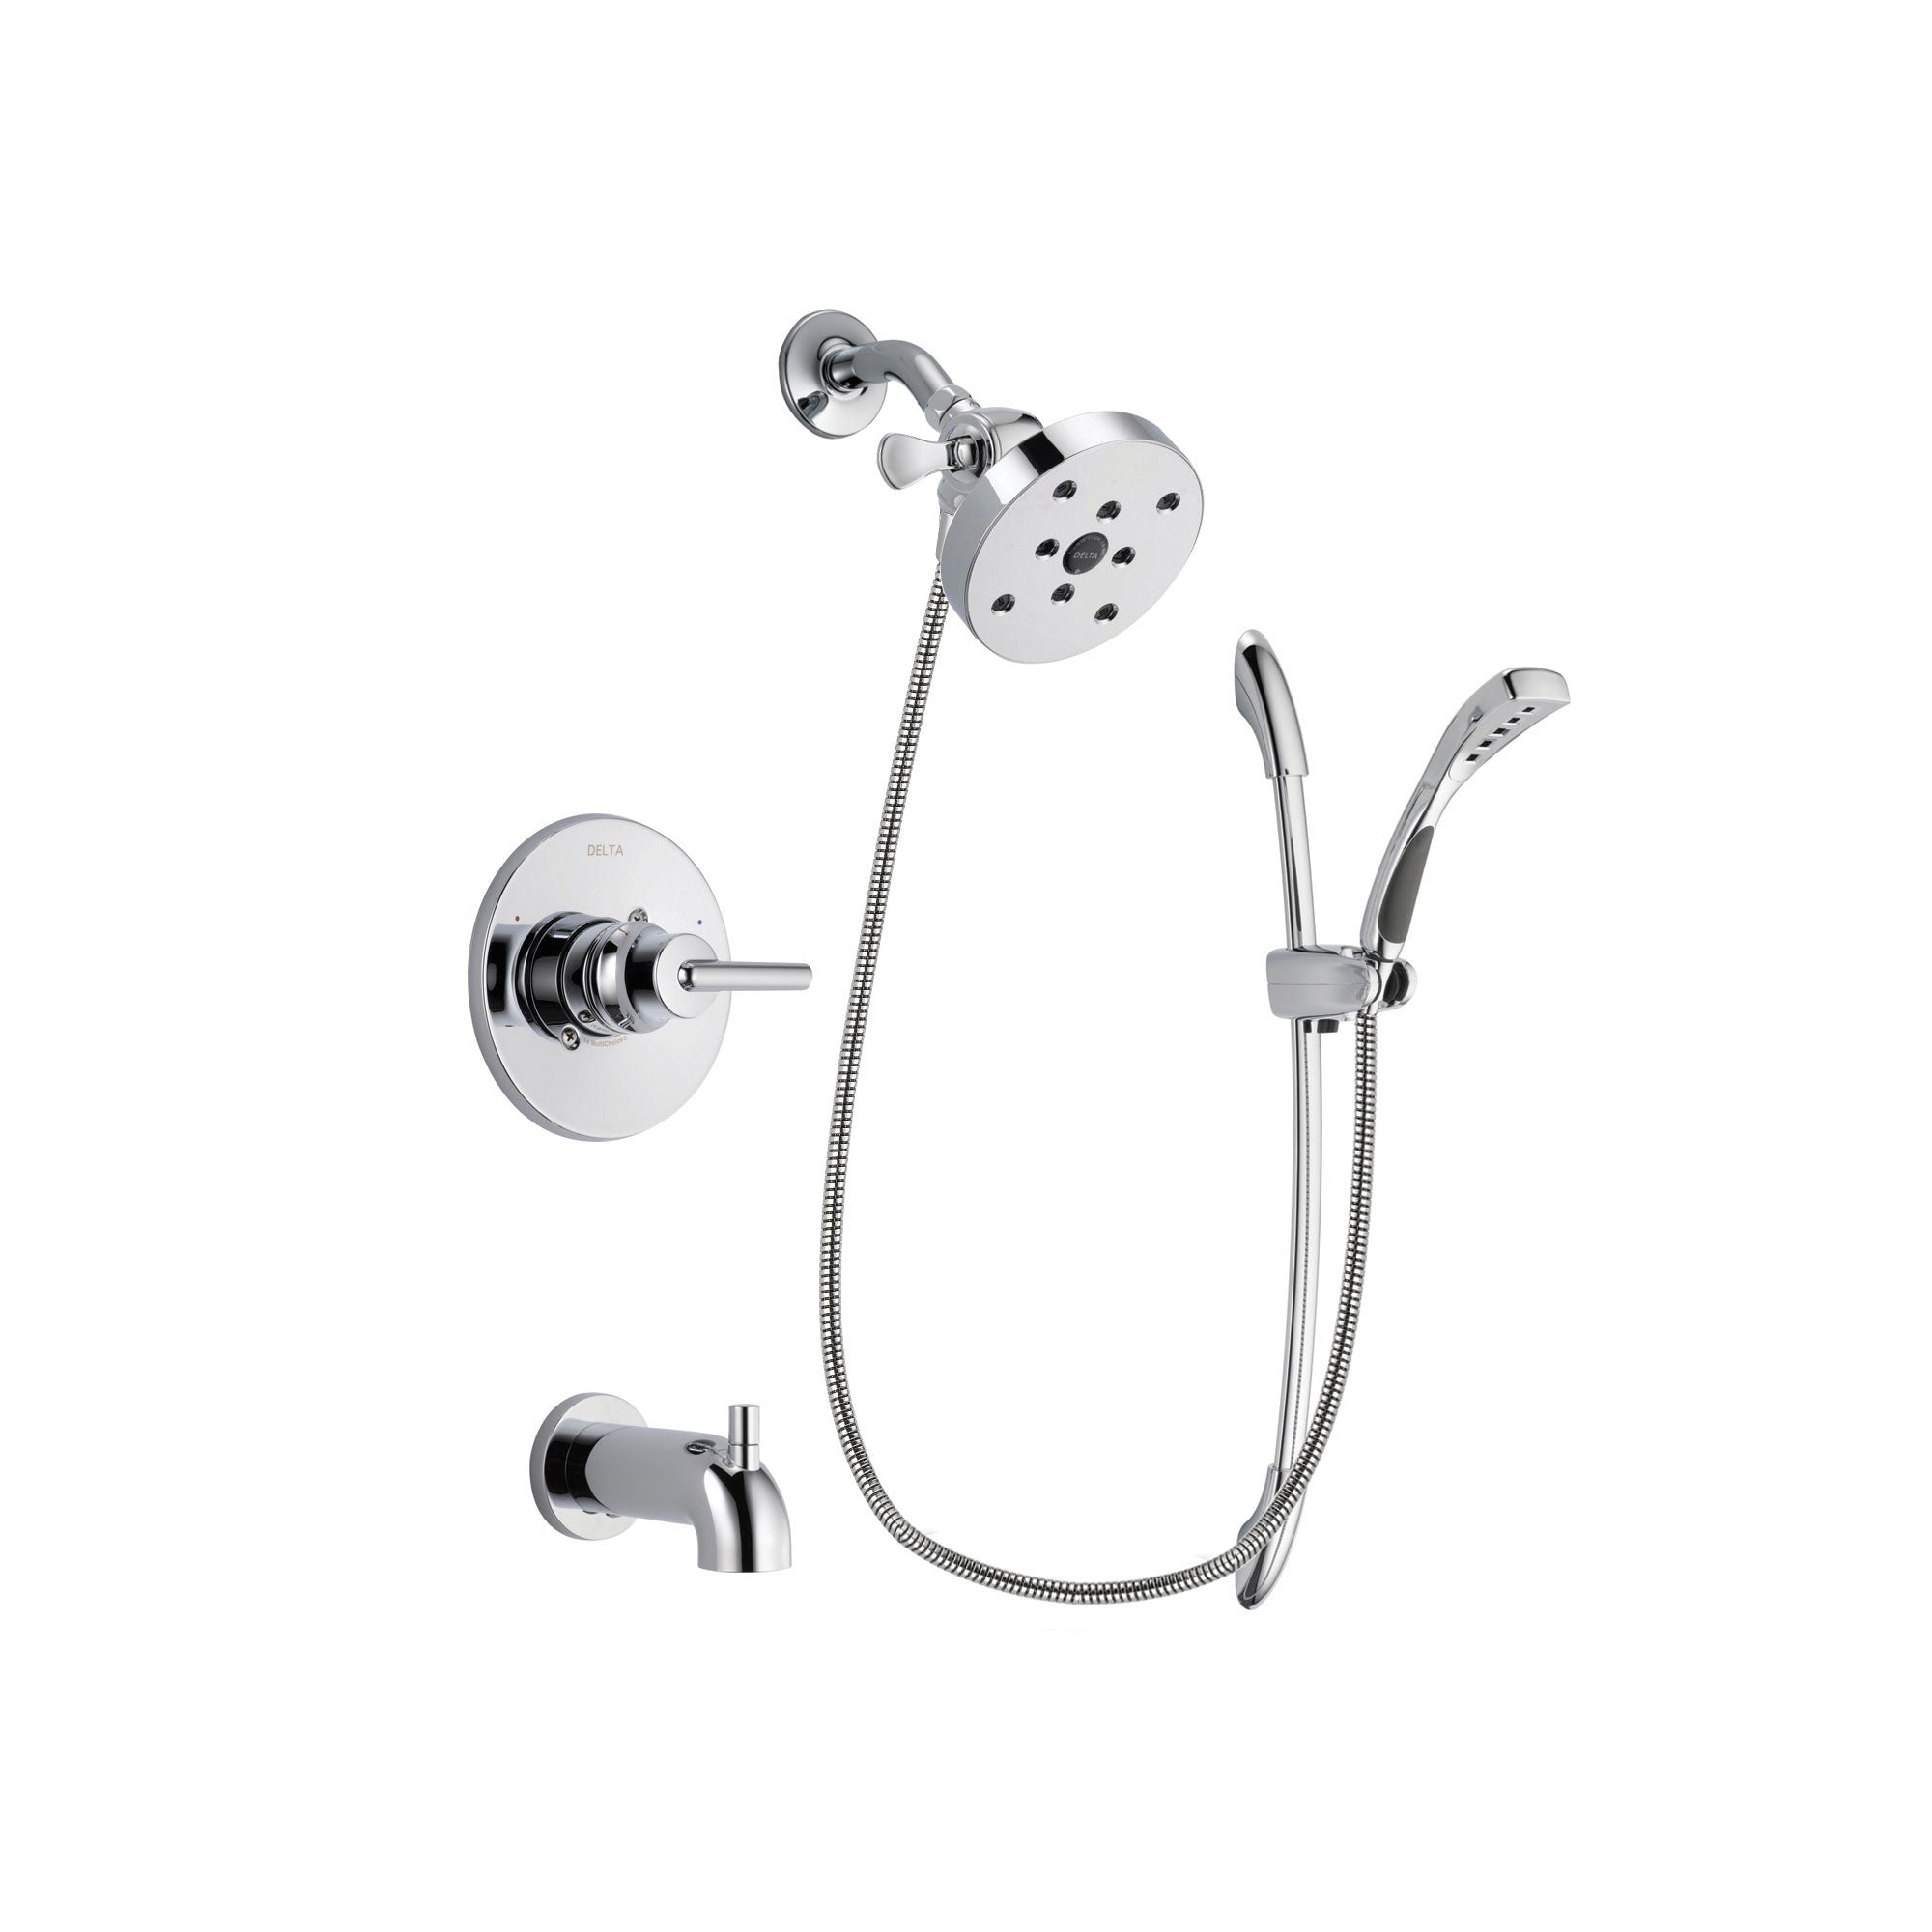 Delta Trinsic Chrome Finish Tub and Shower Faucet System Package with 5-1/2 inch Shower Head and Handheld Shower with Slide Bar Includes Rough-in Valve and Tub Spout DSP0539V